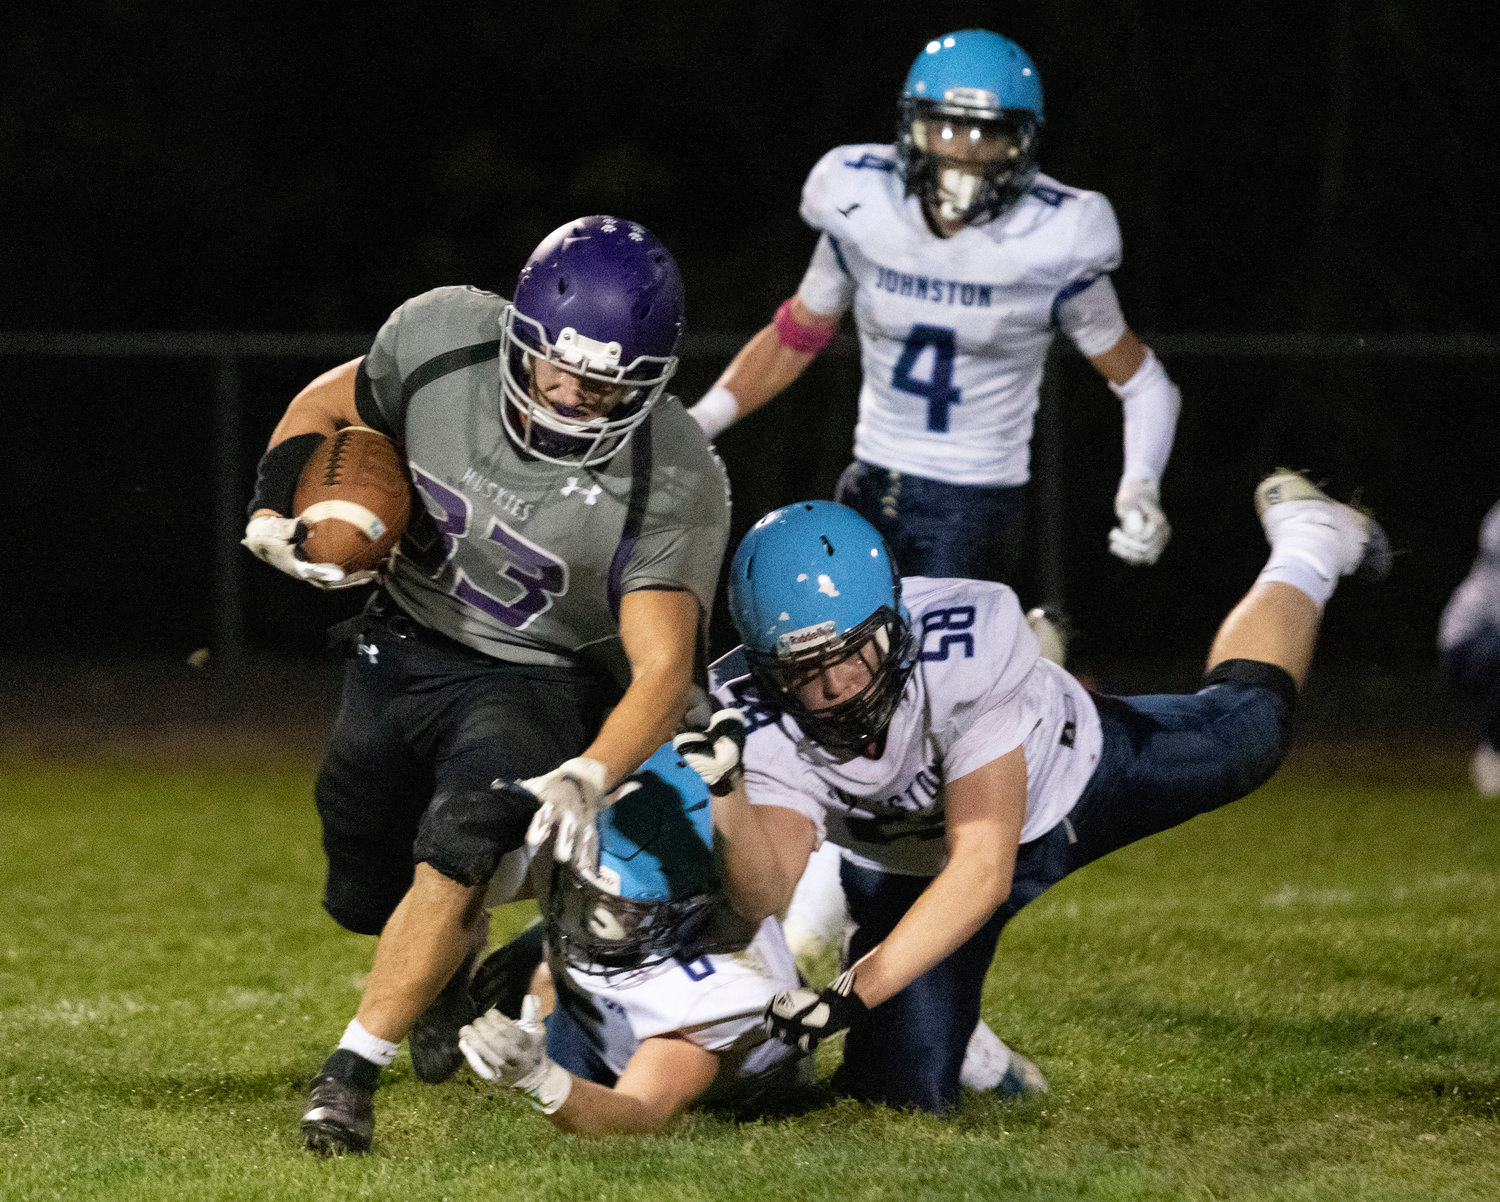 Senior running back Brock Pacheco runs for yardage during their loss to Johnston. Pacheco rushed for 110 yards and a touchdown in the Huskies loss to Ponaganset on Friday night. The running back has gained 850 yards for the season and has two games left to break the 1000 yard mark.